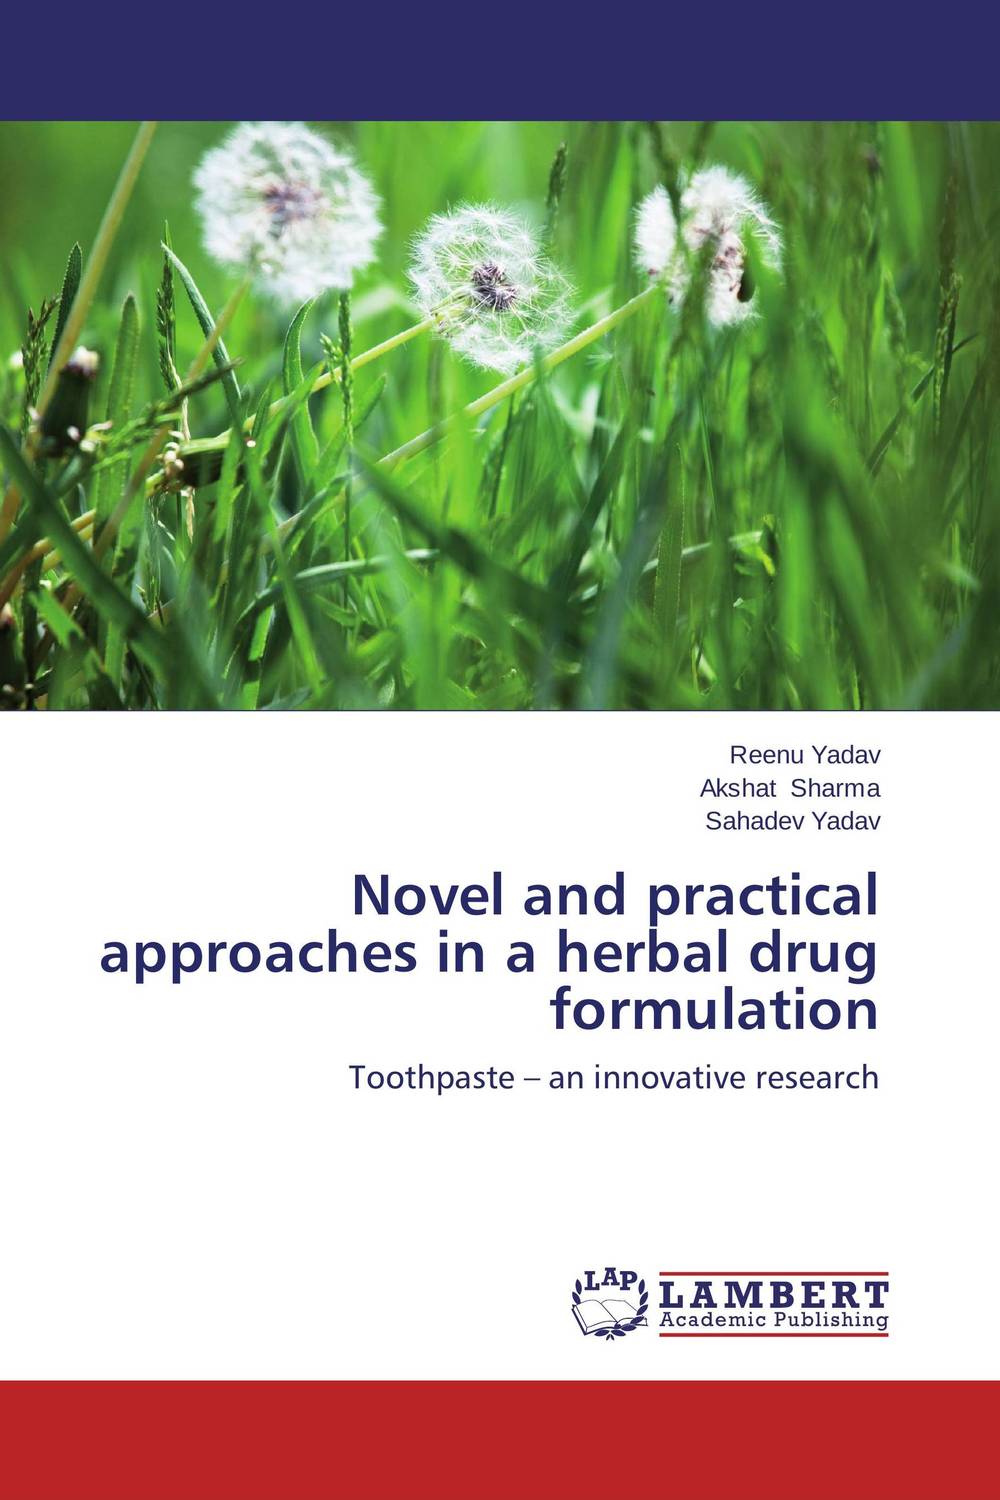 Novel and practical approaches in a herbal drug formulation